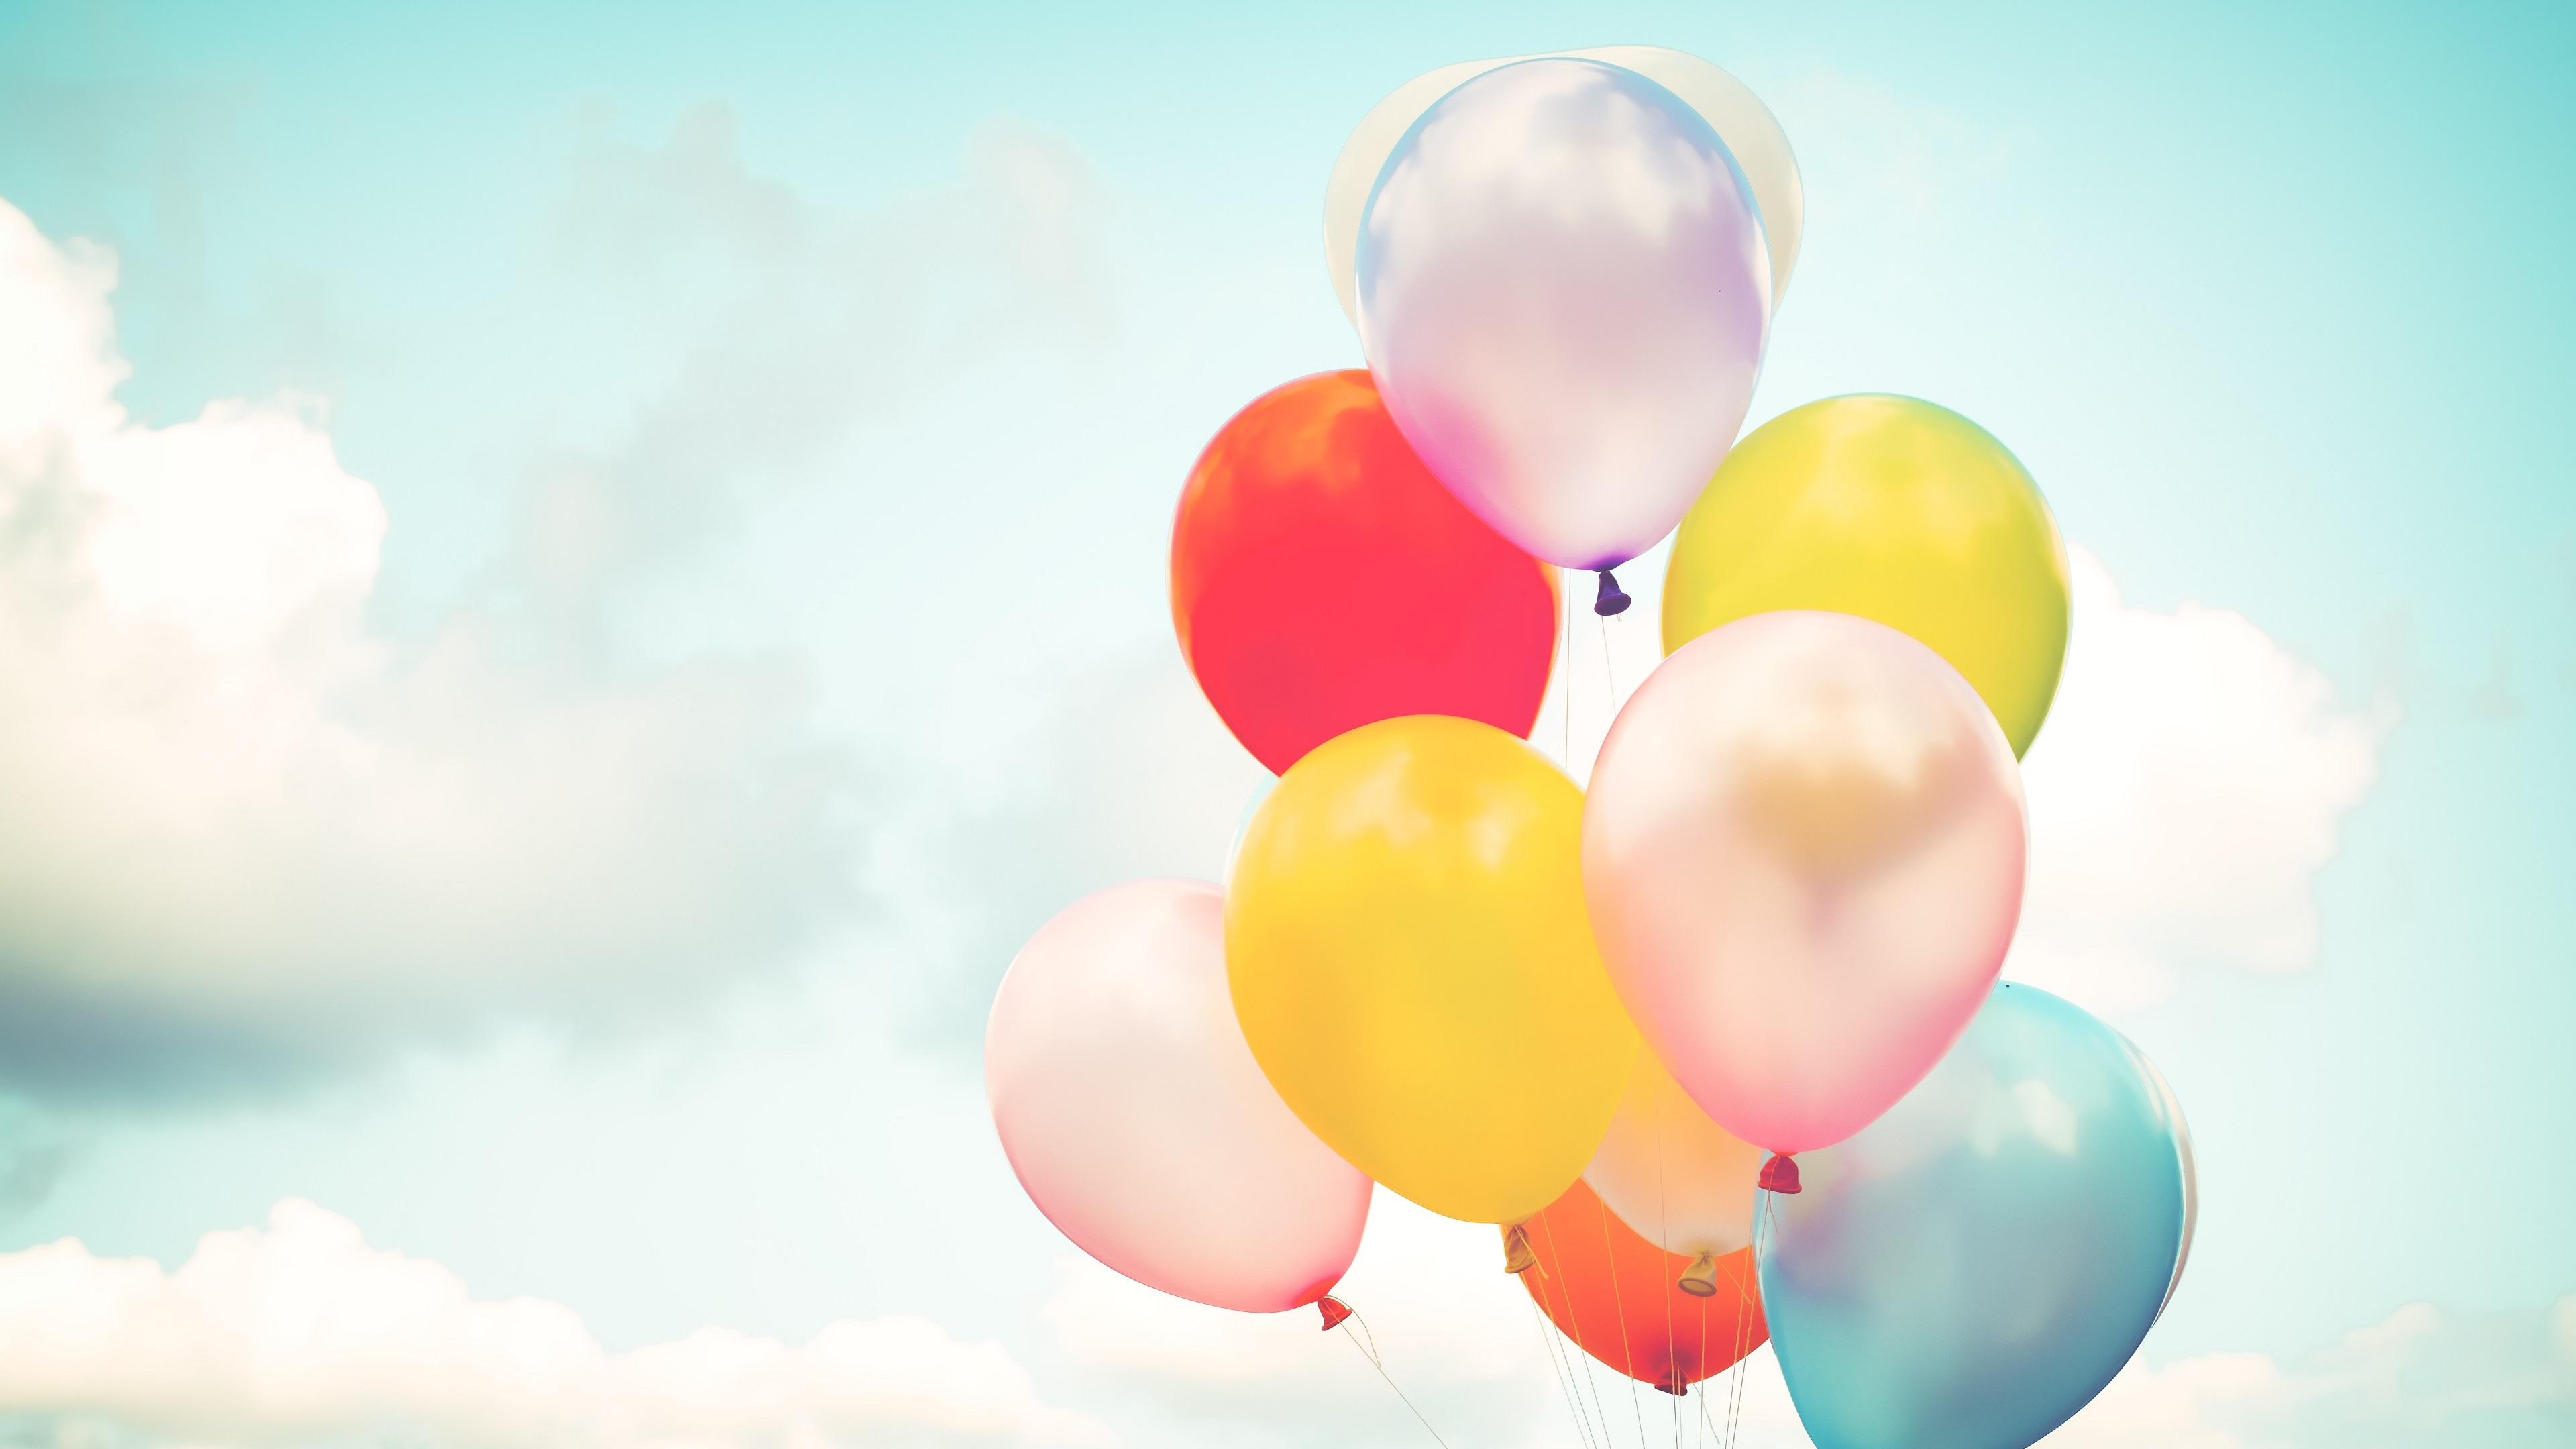 Wallpaper Colorful balloons, sky 3840x2160 UHD 4K Picture, Image